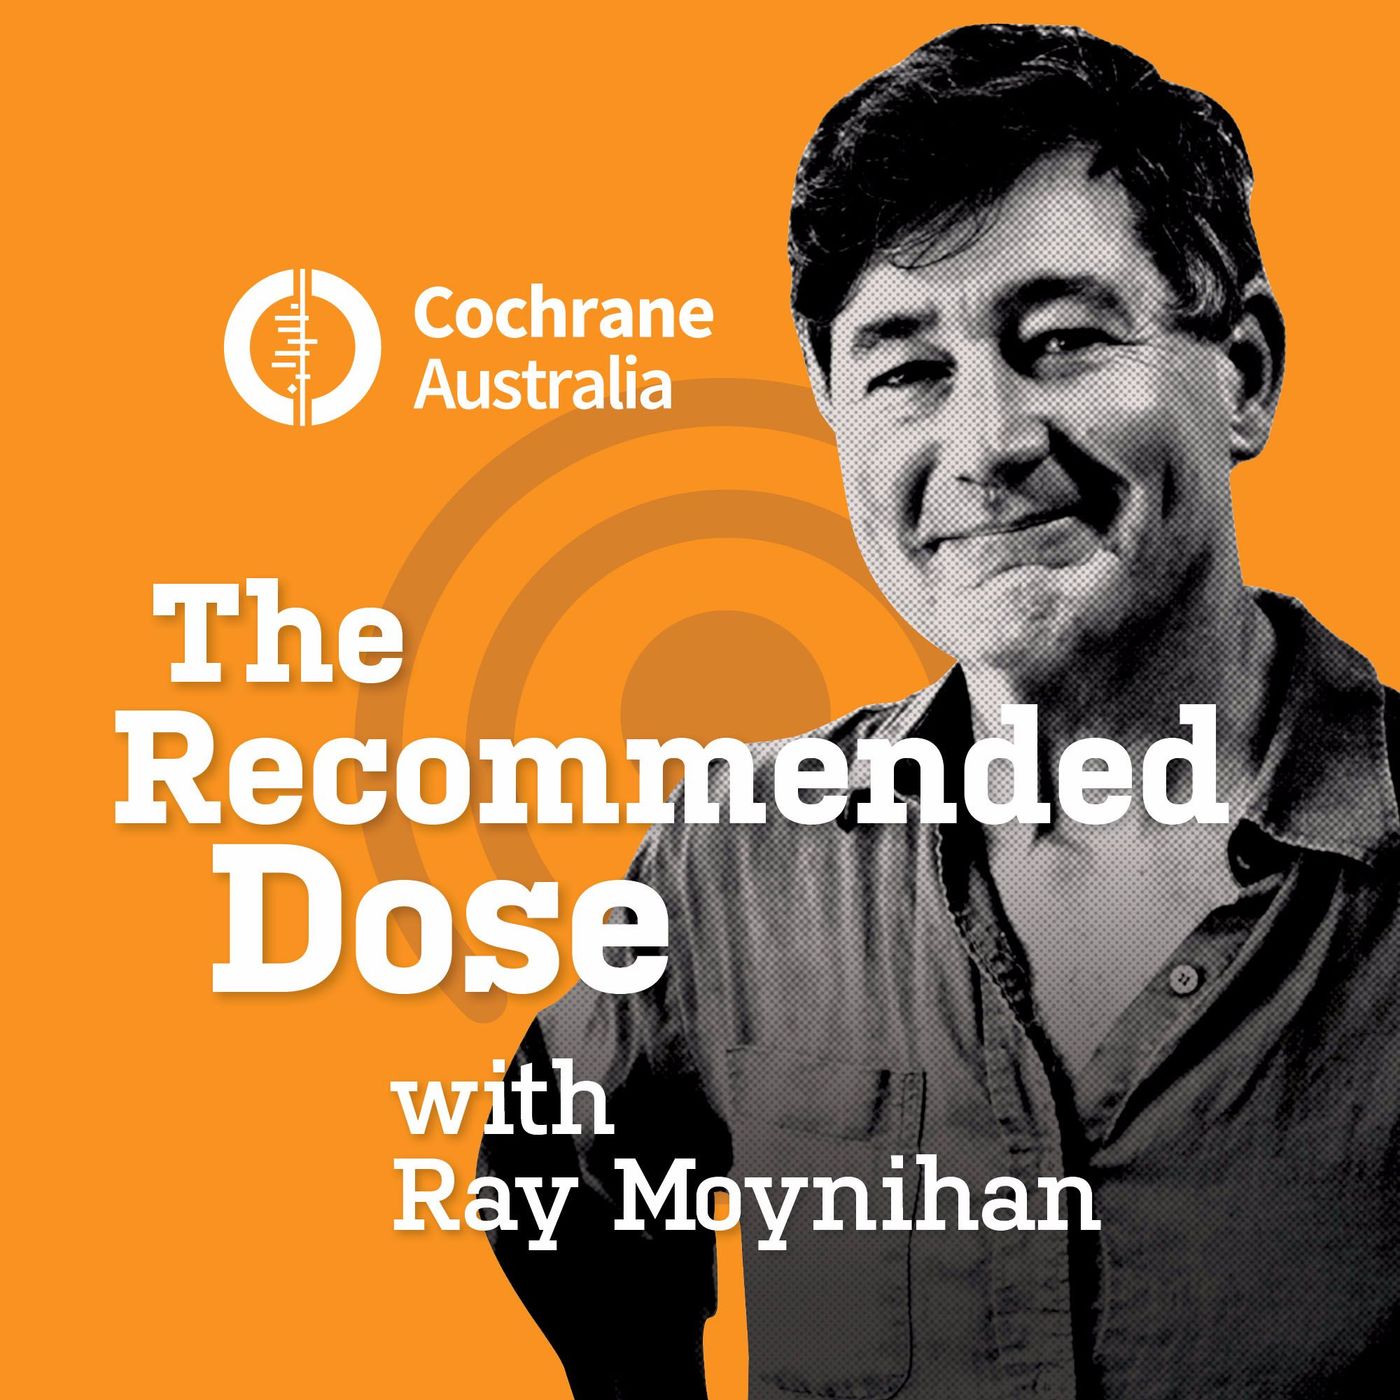 The Recommended Dose with Ray Moynihan